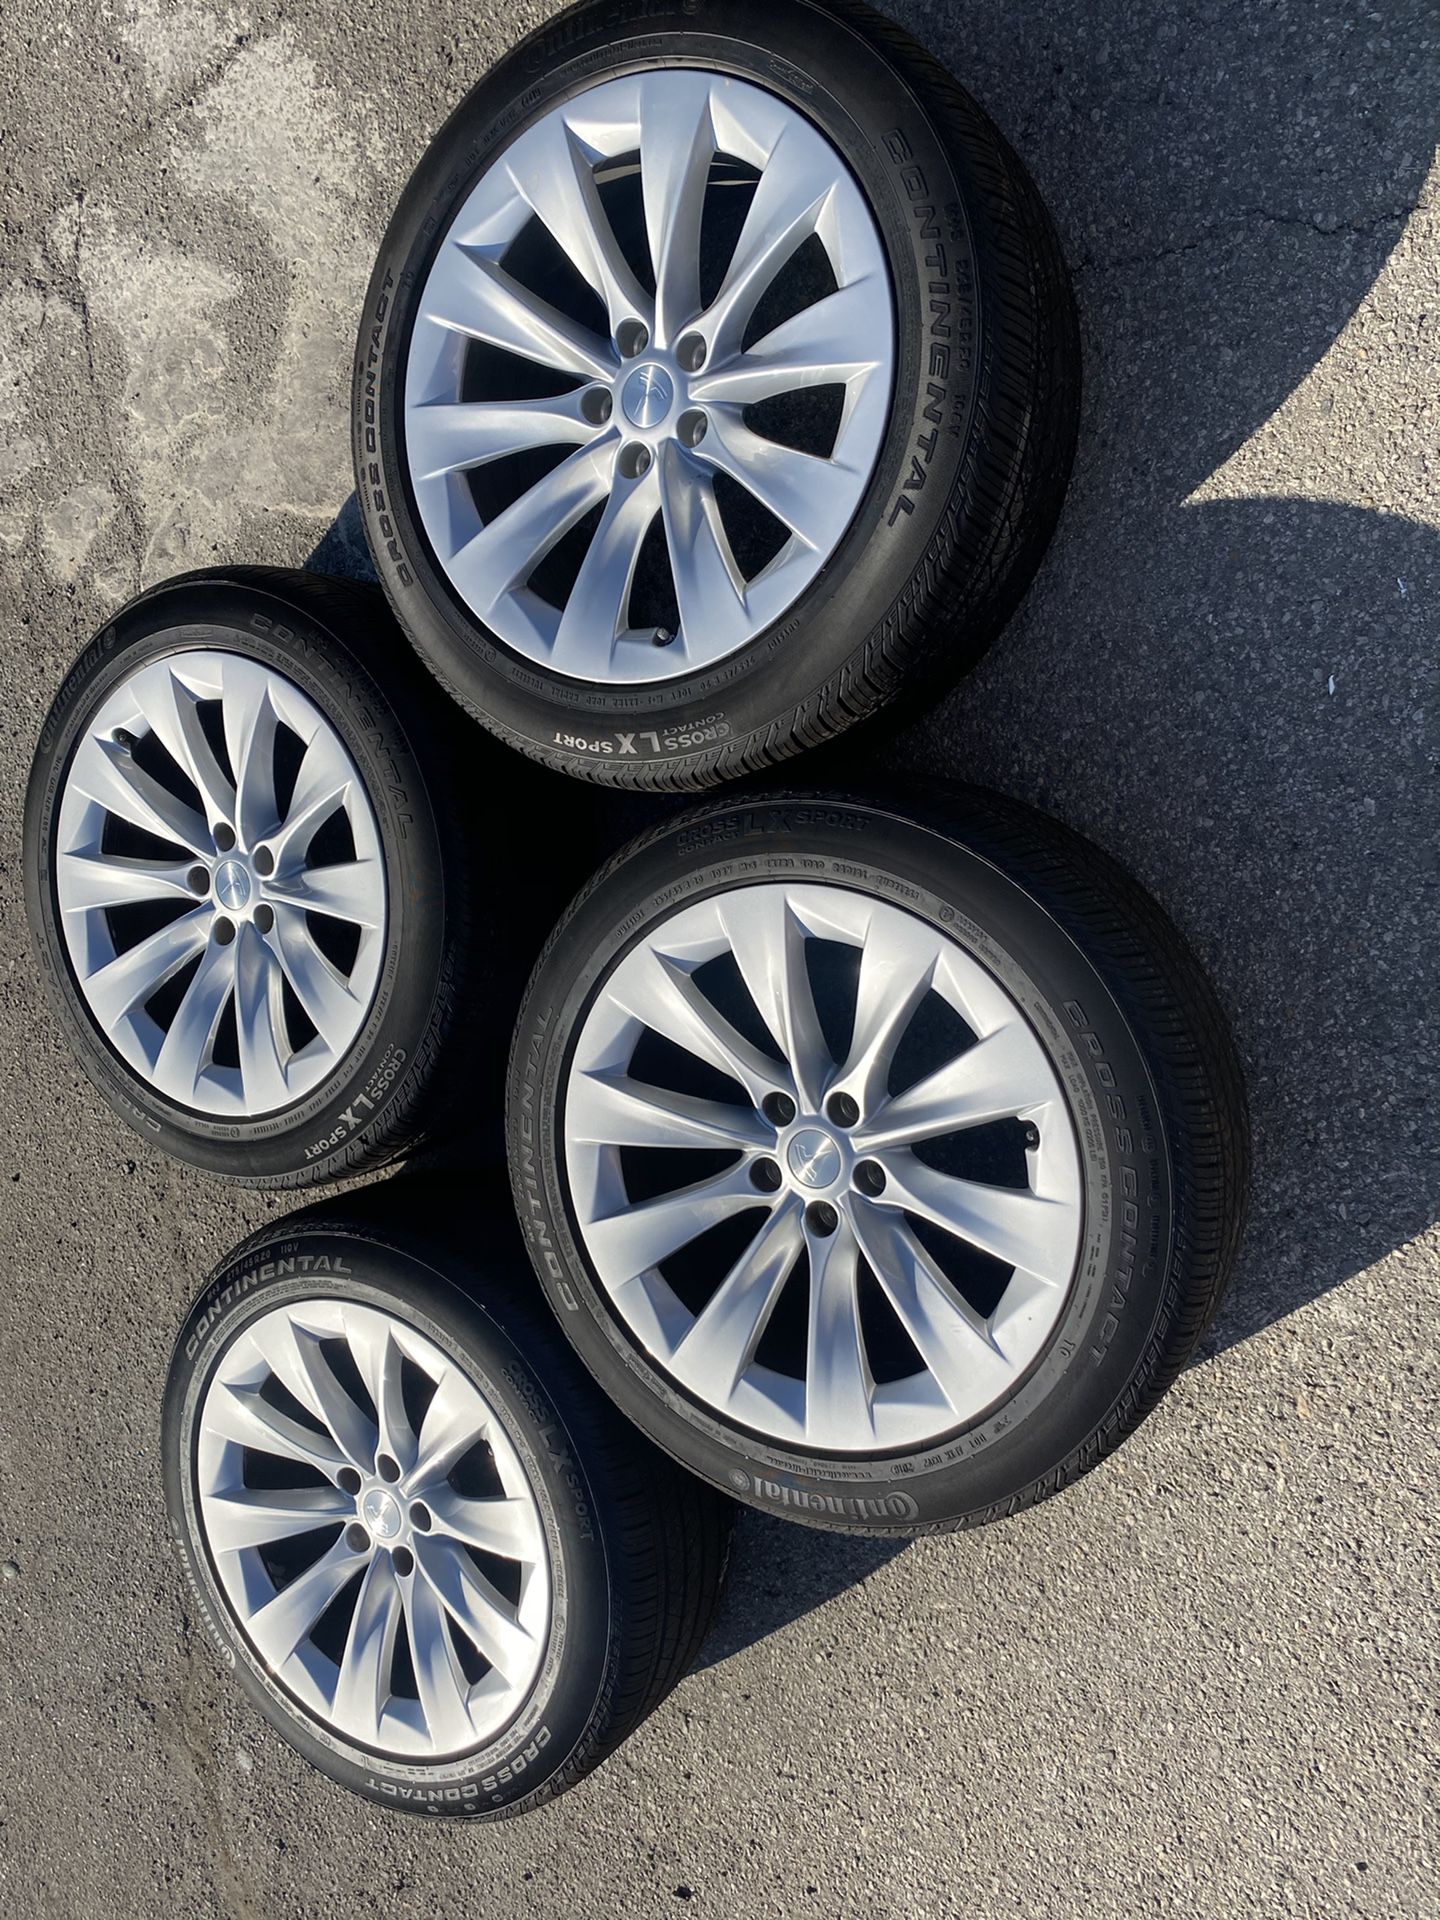 Tesla model x rims and tires 20” with tire sensor